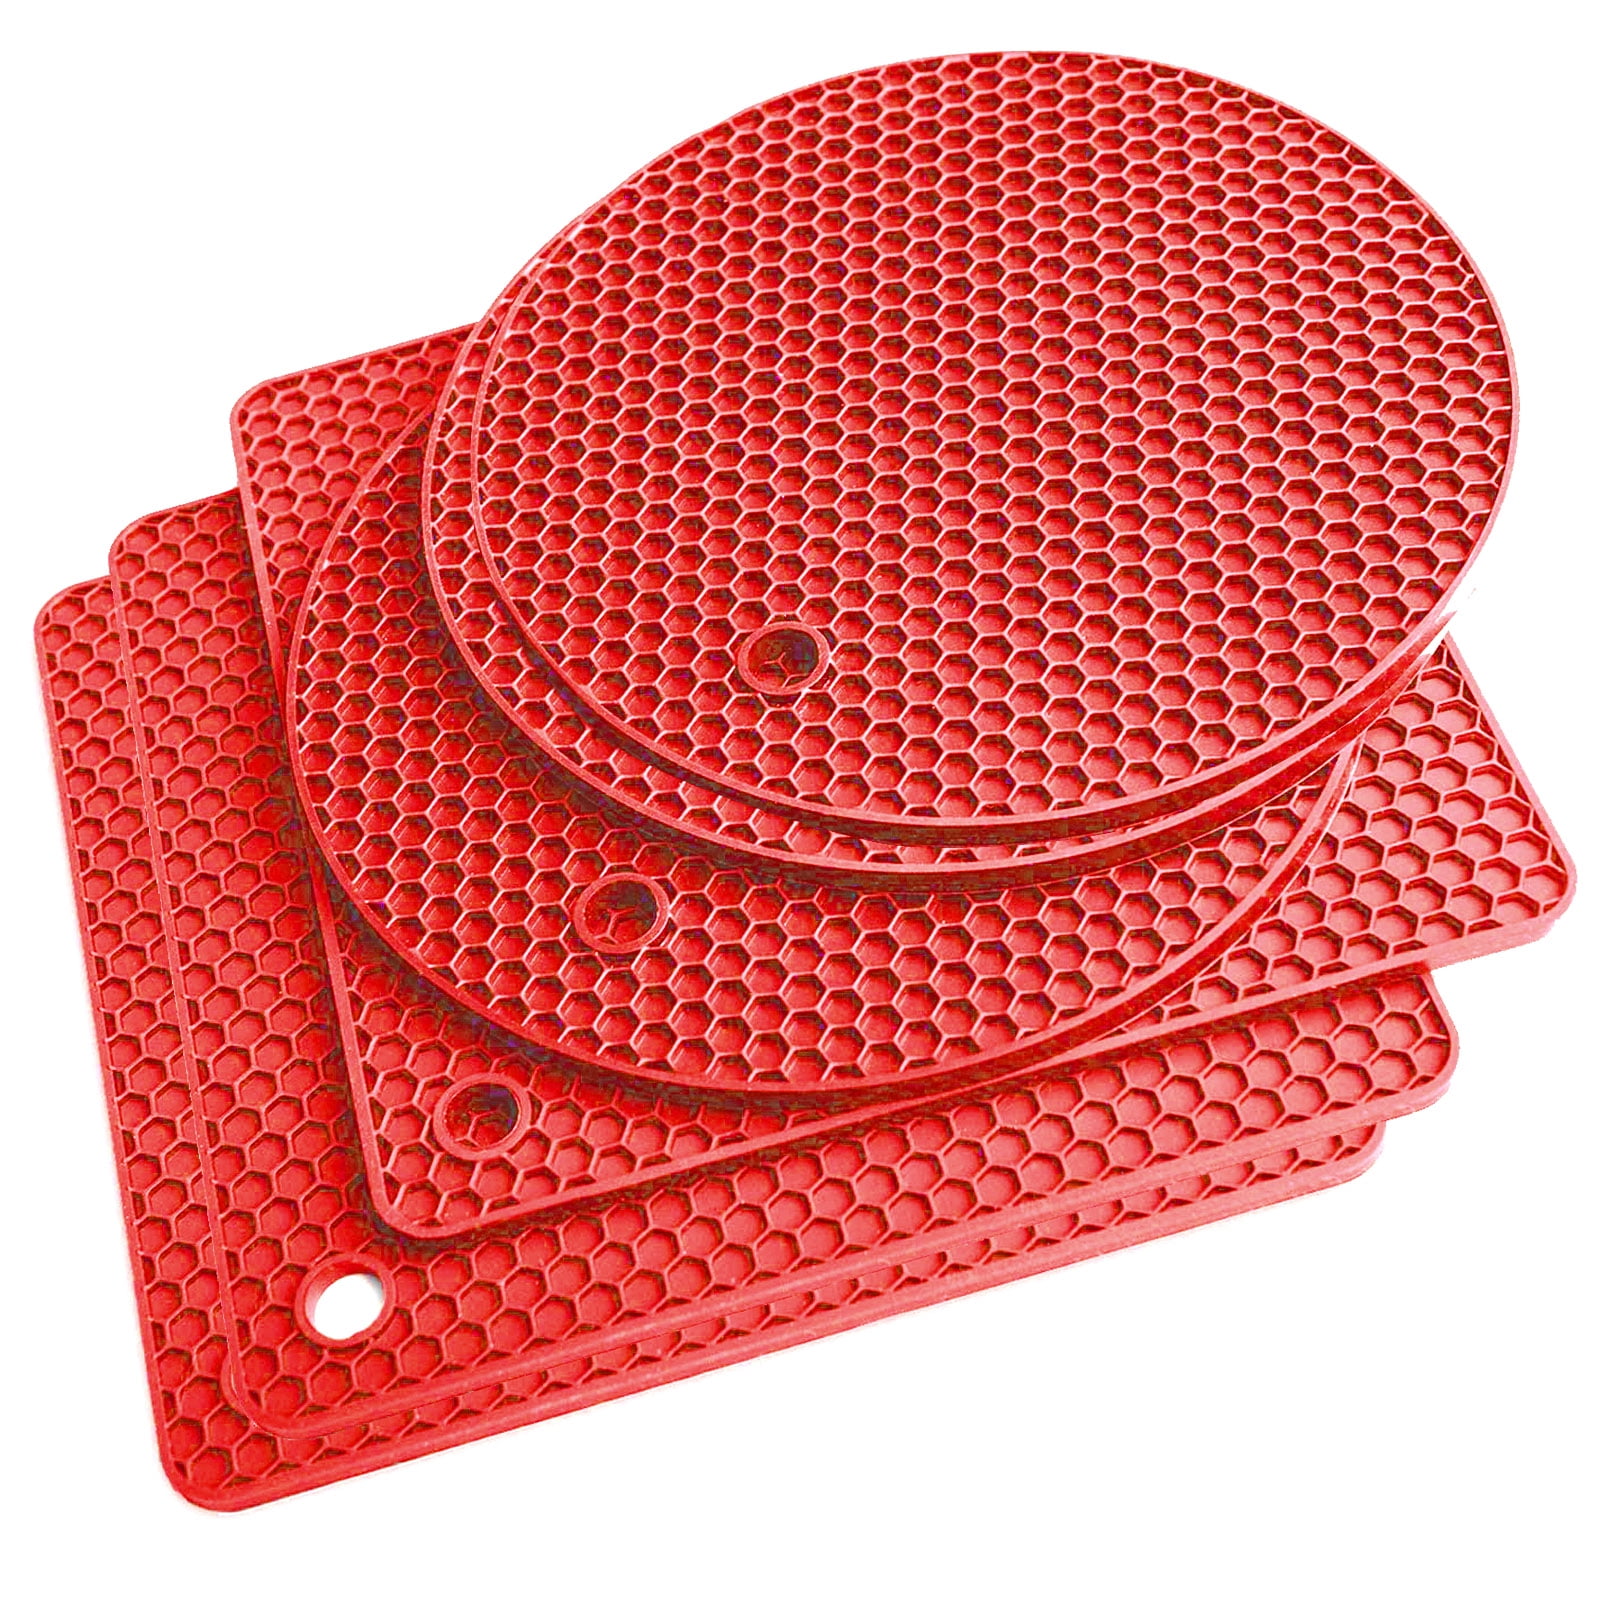 Yesbay 6Pcs Silicone Heat Resistant Honeycomb Pads Non-slip Hot Pot Holder  Drying Mats Potholders Kitchen Tools,Green 